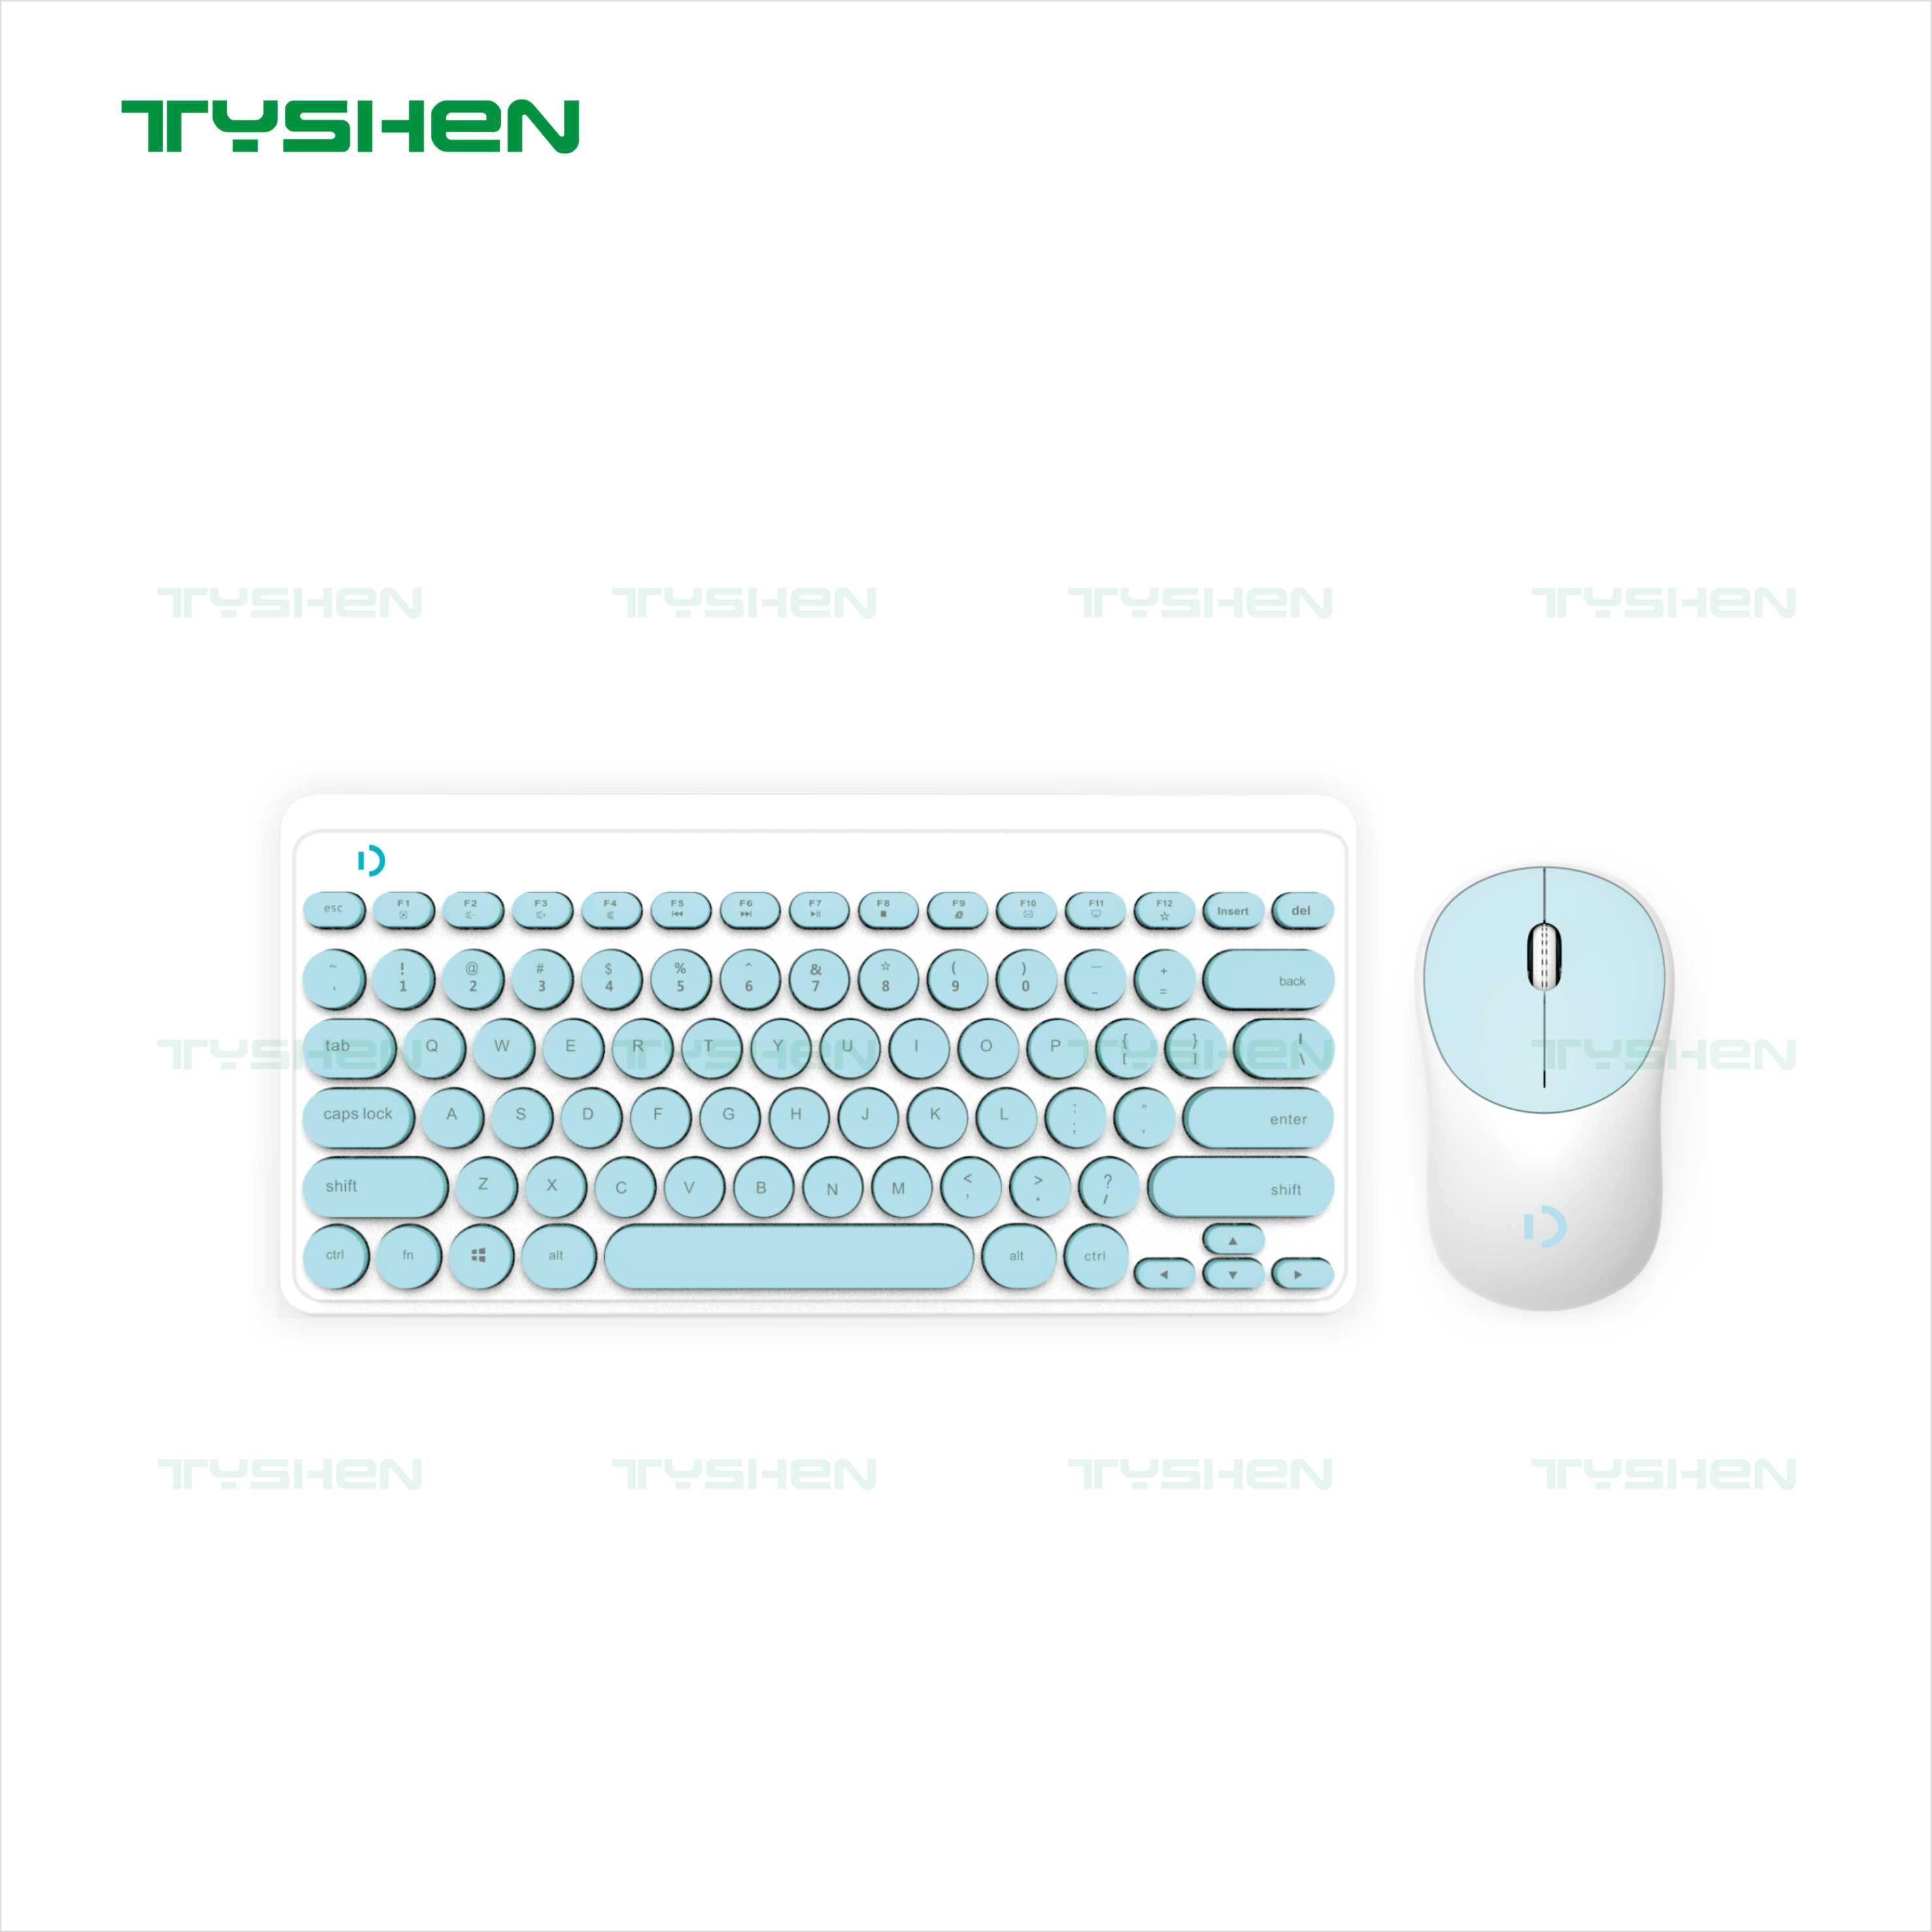 Quiet and Comfortable 2.4G Wireless Keyboard and Mouse Combo, Suitable for Business Office, Laptop